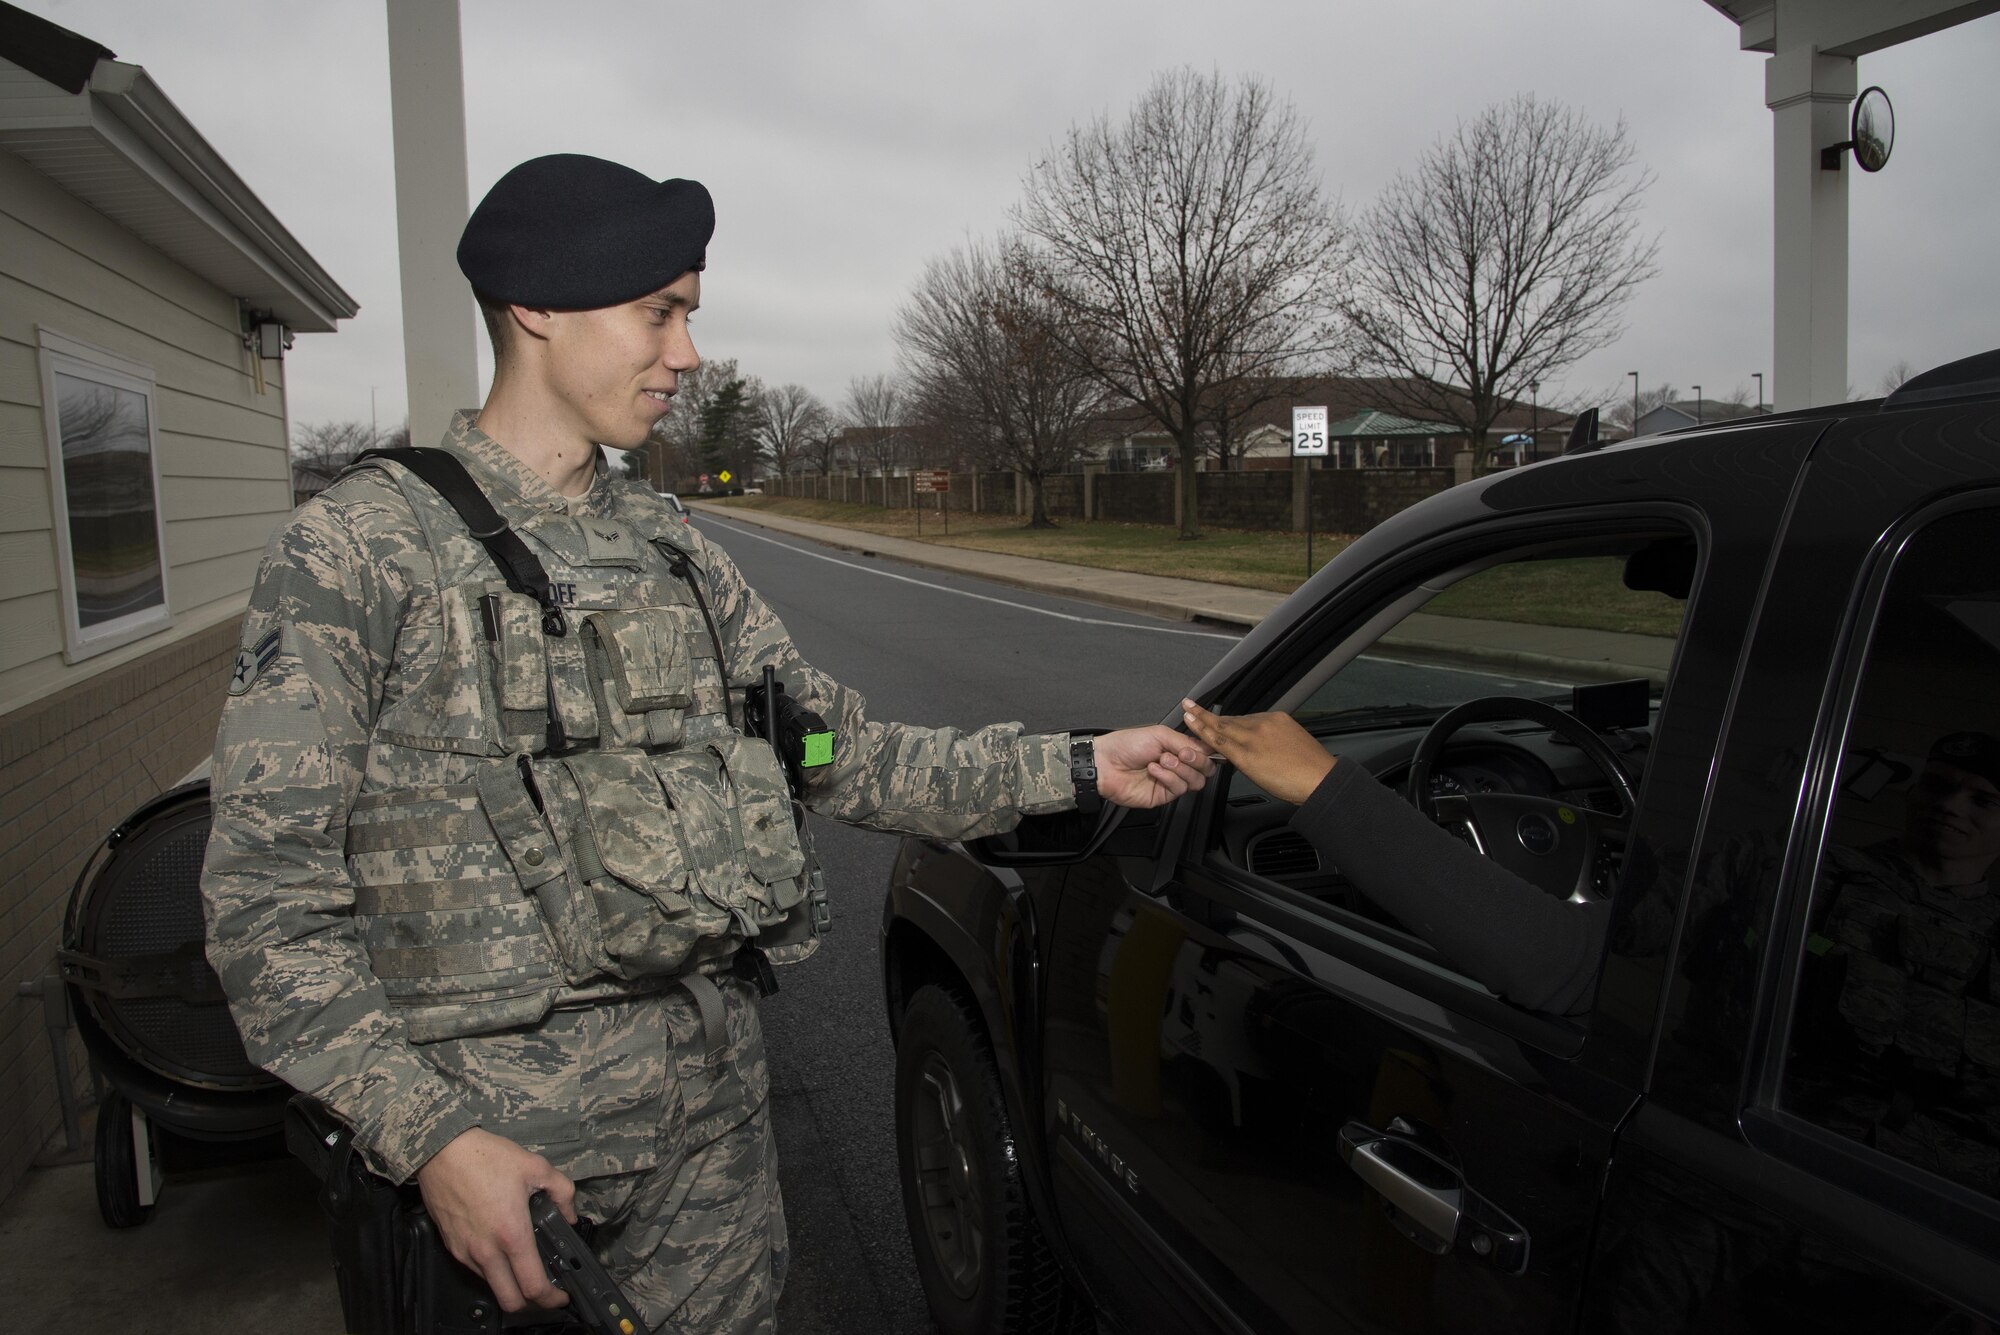 Airman 1st Class Jake Goff, 436th Security Forces Squadron defender, checks an ID card Dec. 12, 2016, at the base housing gate on Dover Air Force Base, Del. Defenders ensure year-round security coverage of the installation and its assets. (U.S. Air Force photo by Senior Airman Aaron J. Jenne)